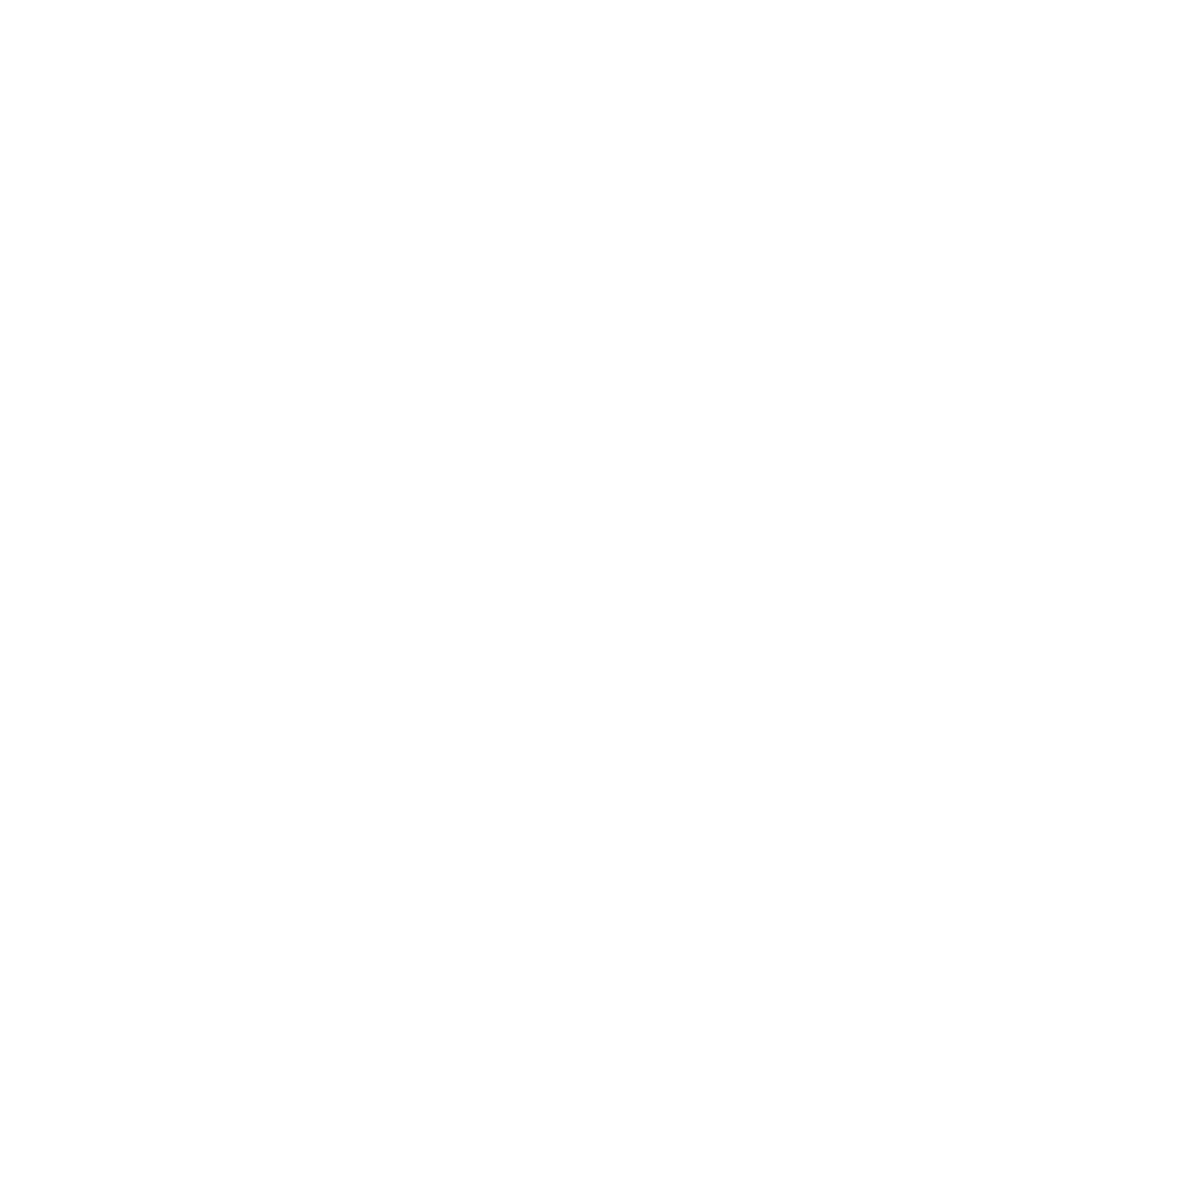 The Wholistic Connection